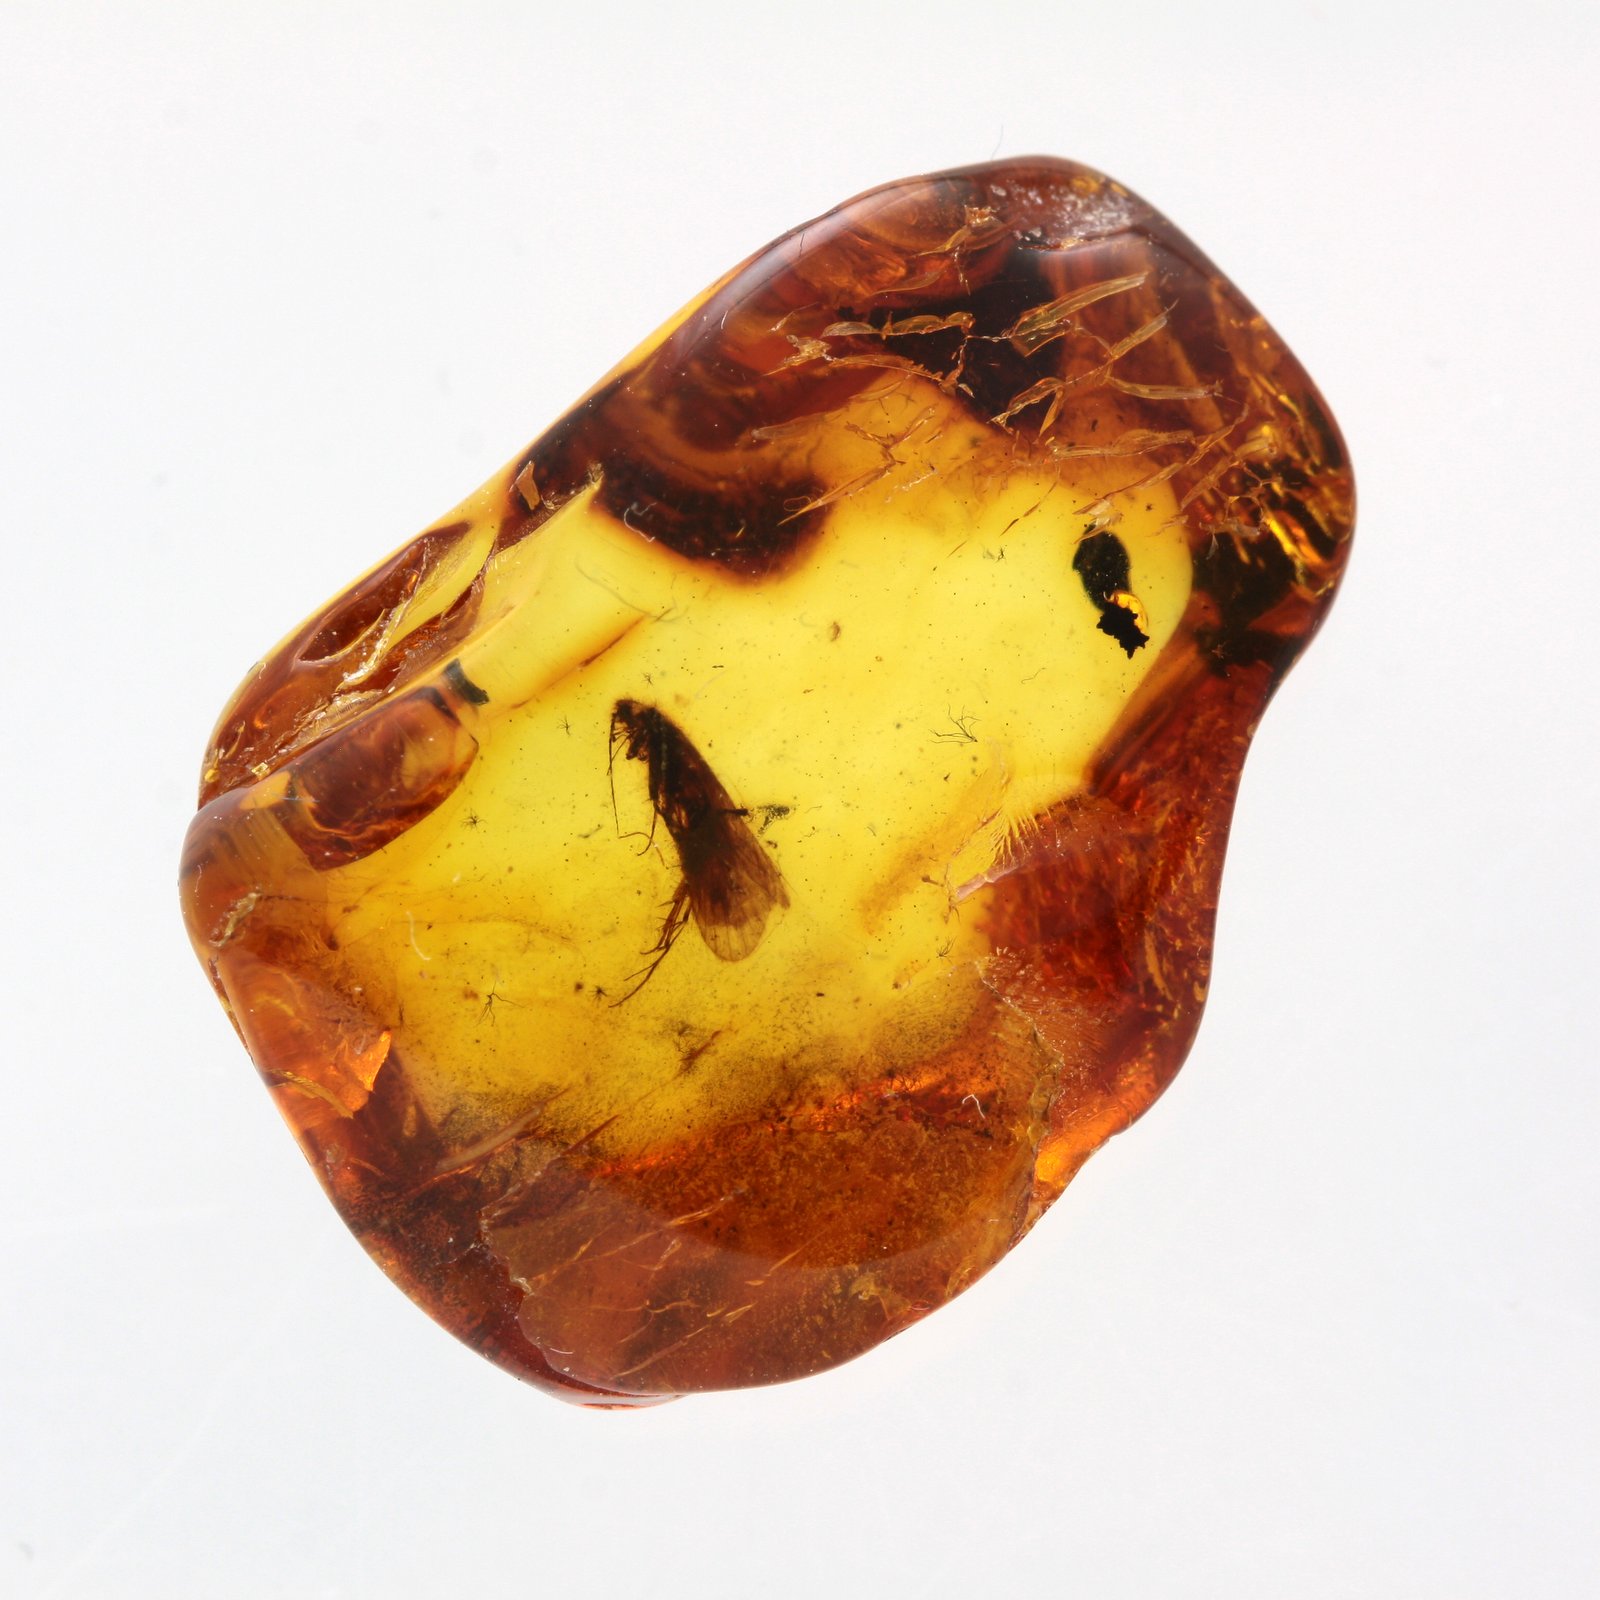 Genuine Baltic Amber With Insect Inclusion